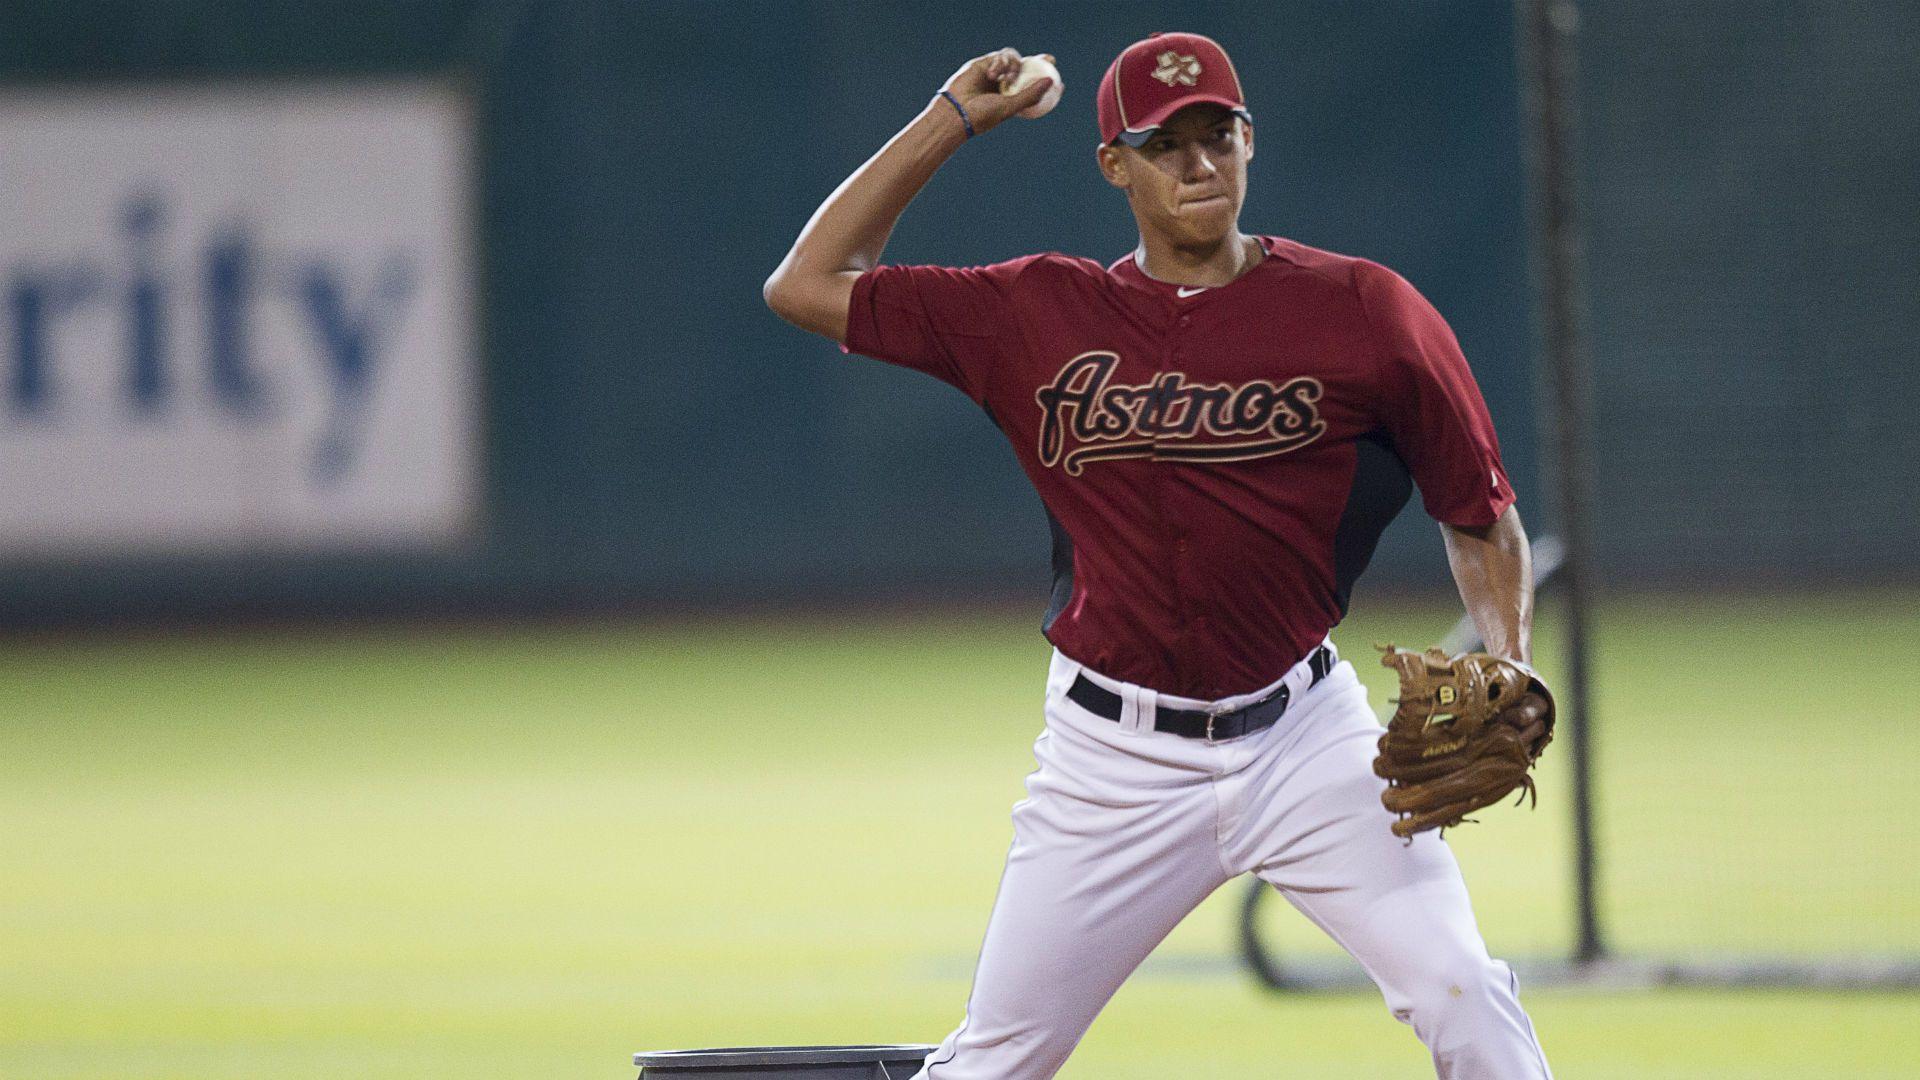 Scouting the Prospects: Correa could star for Astros. Fantasy